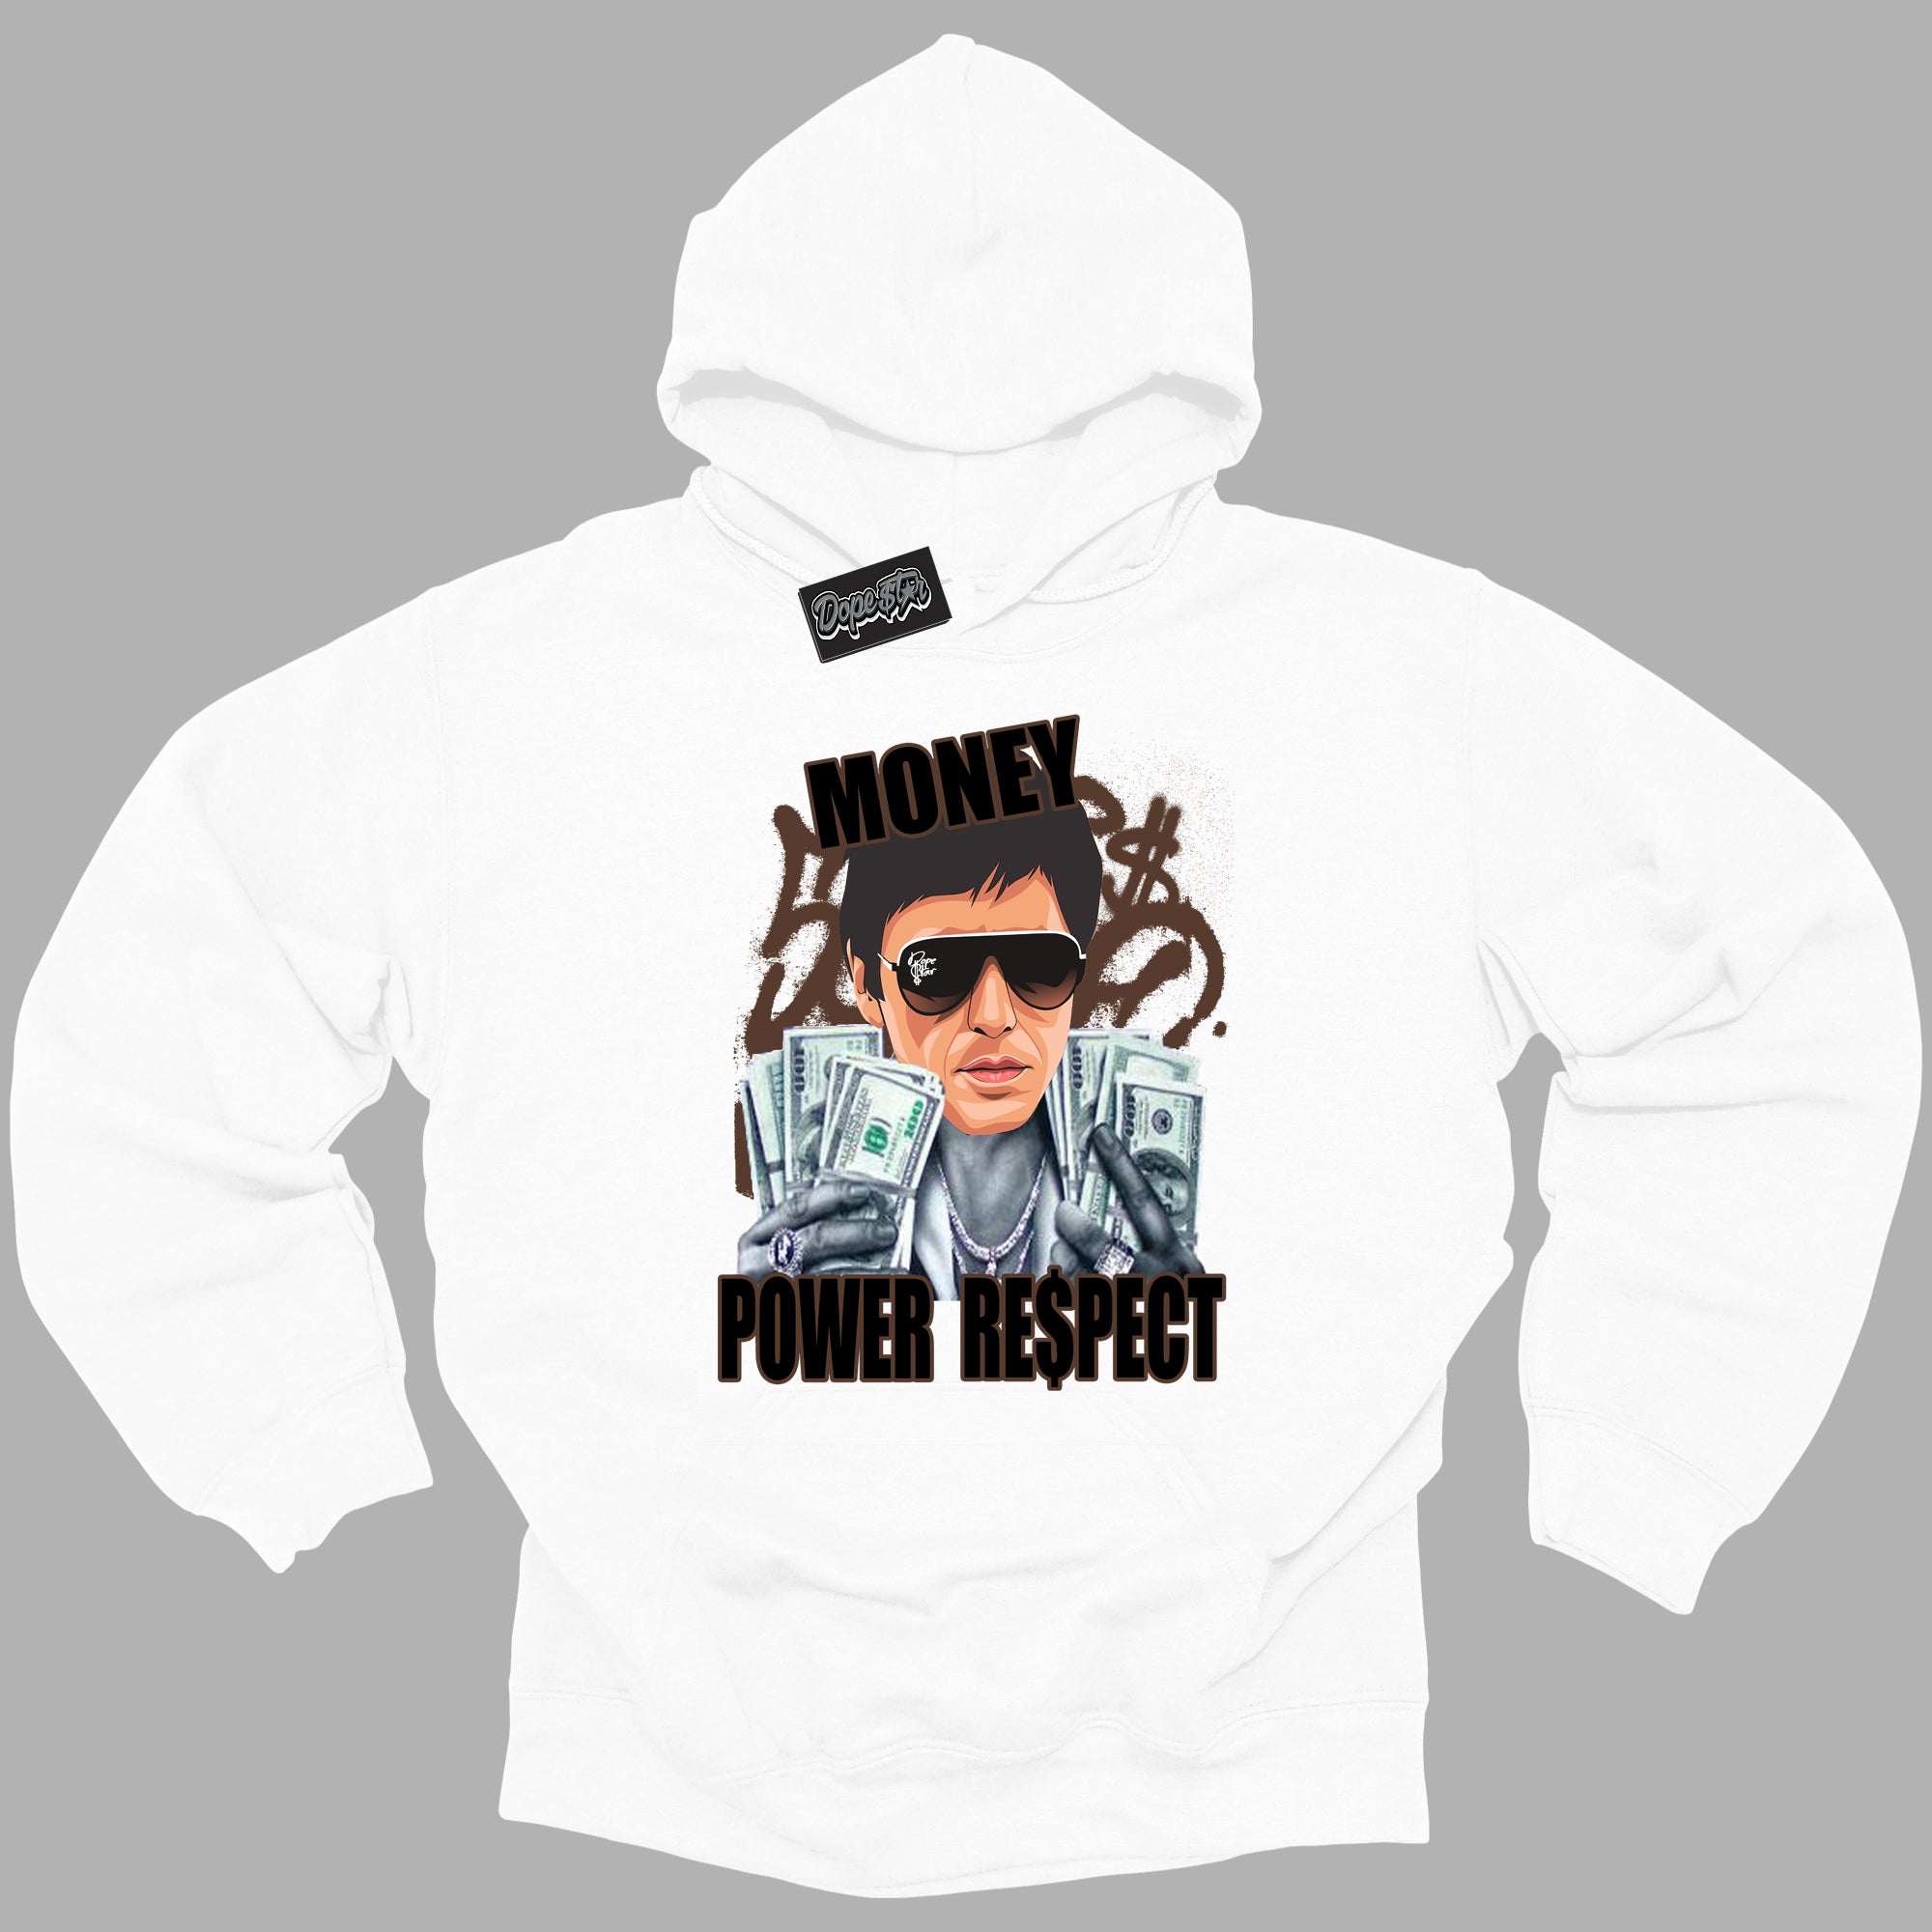 Cool White Graphic DopeStar Hoodie with “ Tony Montana “ print, that perfectly matches Palomino 1s sneakers